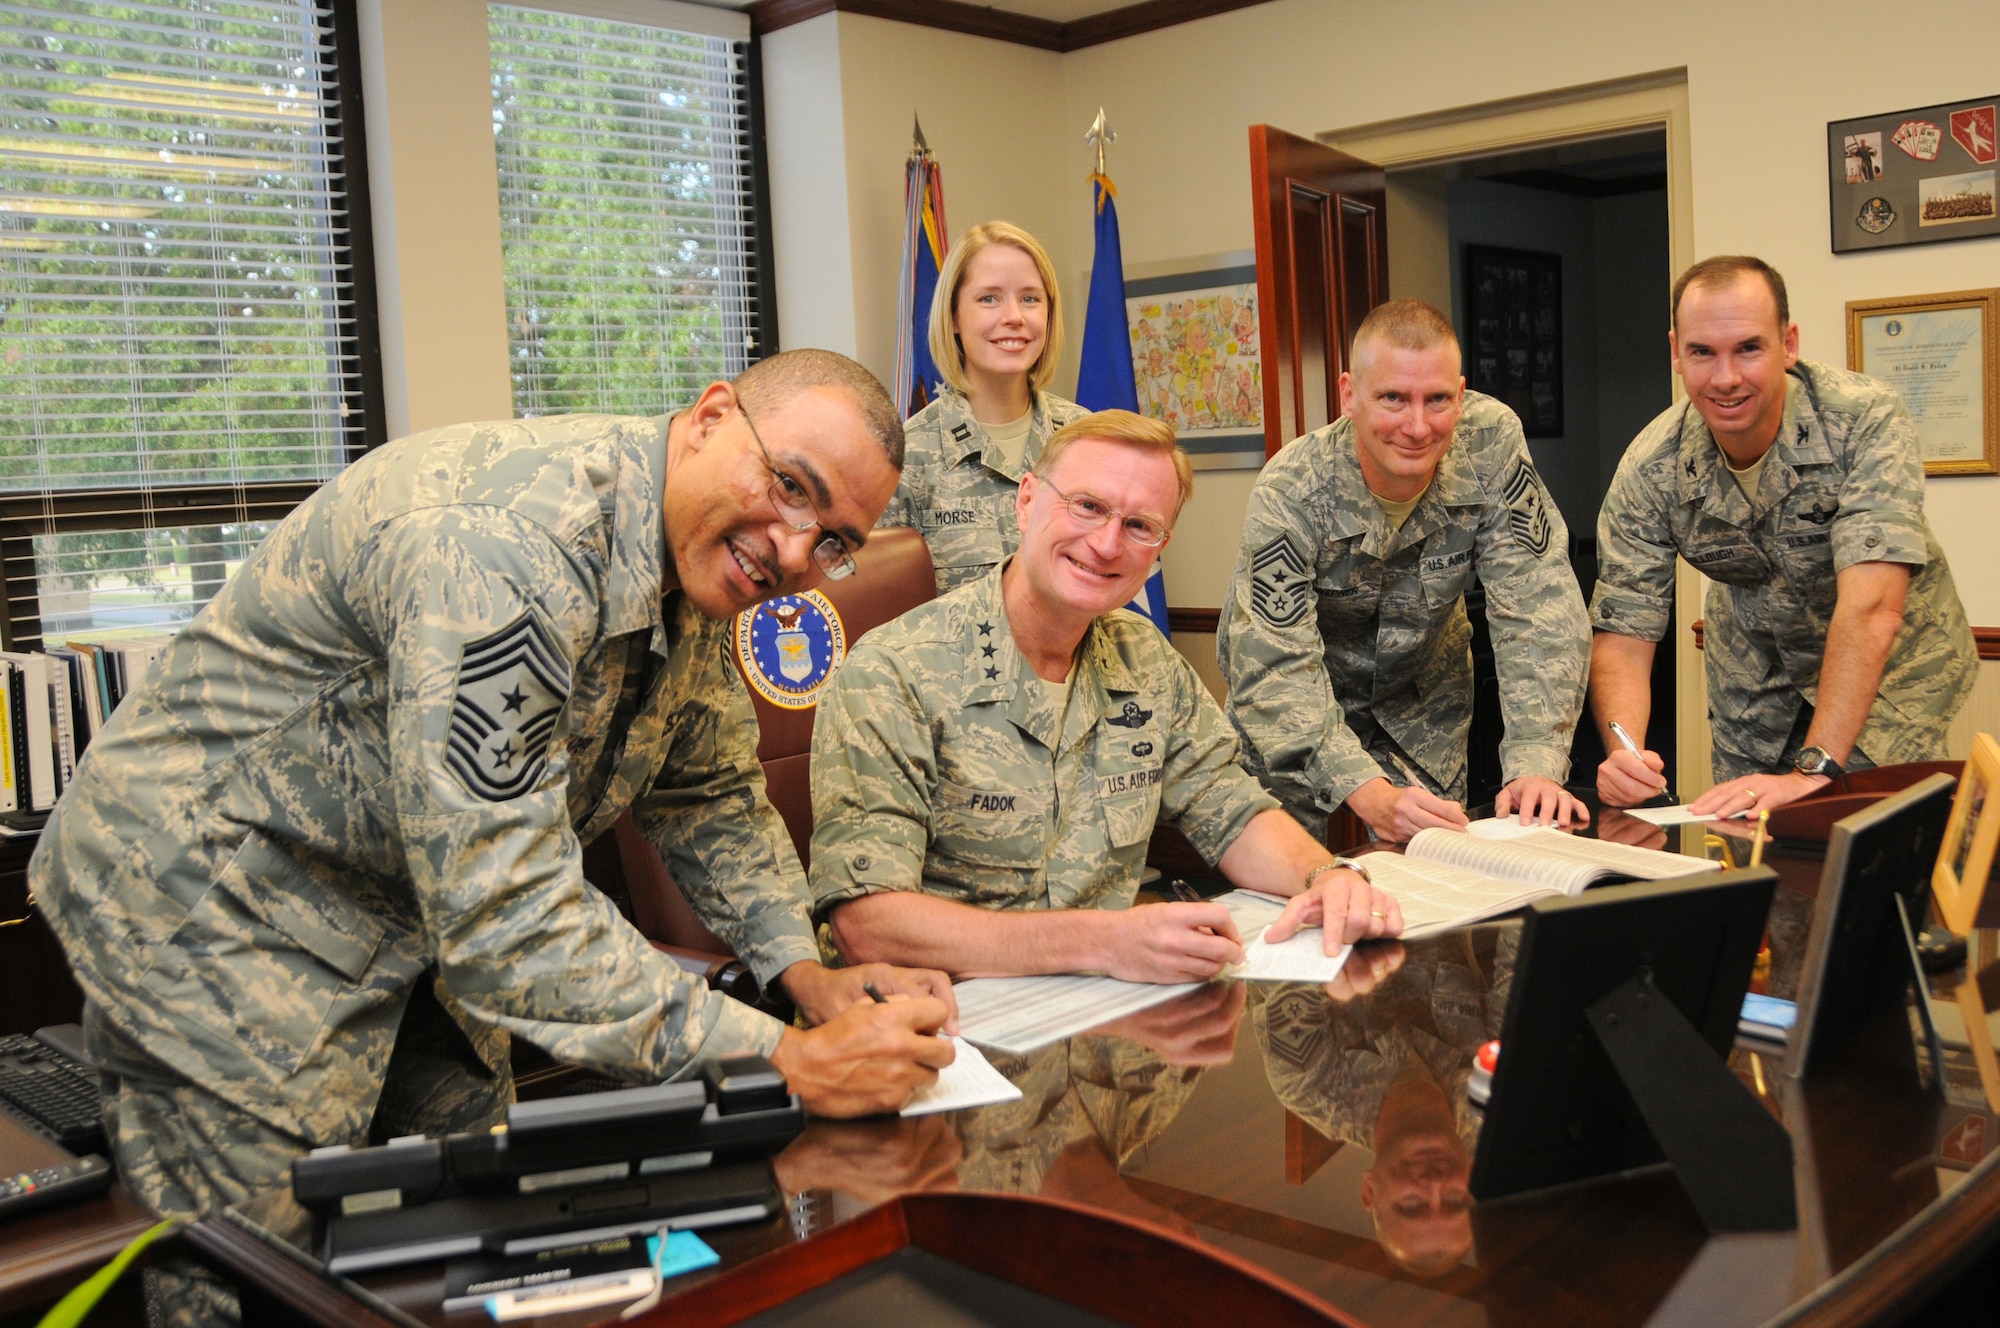 From left, Chief Master Sgt. Lonnie Slater, Air University command chief; Capt. Paula Morse, Maxwell installation project officer; Lt. Gen. David Fadok, Air University commander and president; Chief Master Sgt. Jeffrey Wepner, 42nd Air Base Wing command chief; and Col. Brian Killough, 42nd Air Base Wing commander, sign pledge forms during the Combined Federal Campaign kickoff event Sept. 22 at the officers’ club. (Air Force photo/Chris Baldwin)